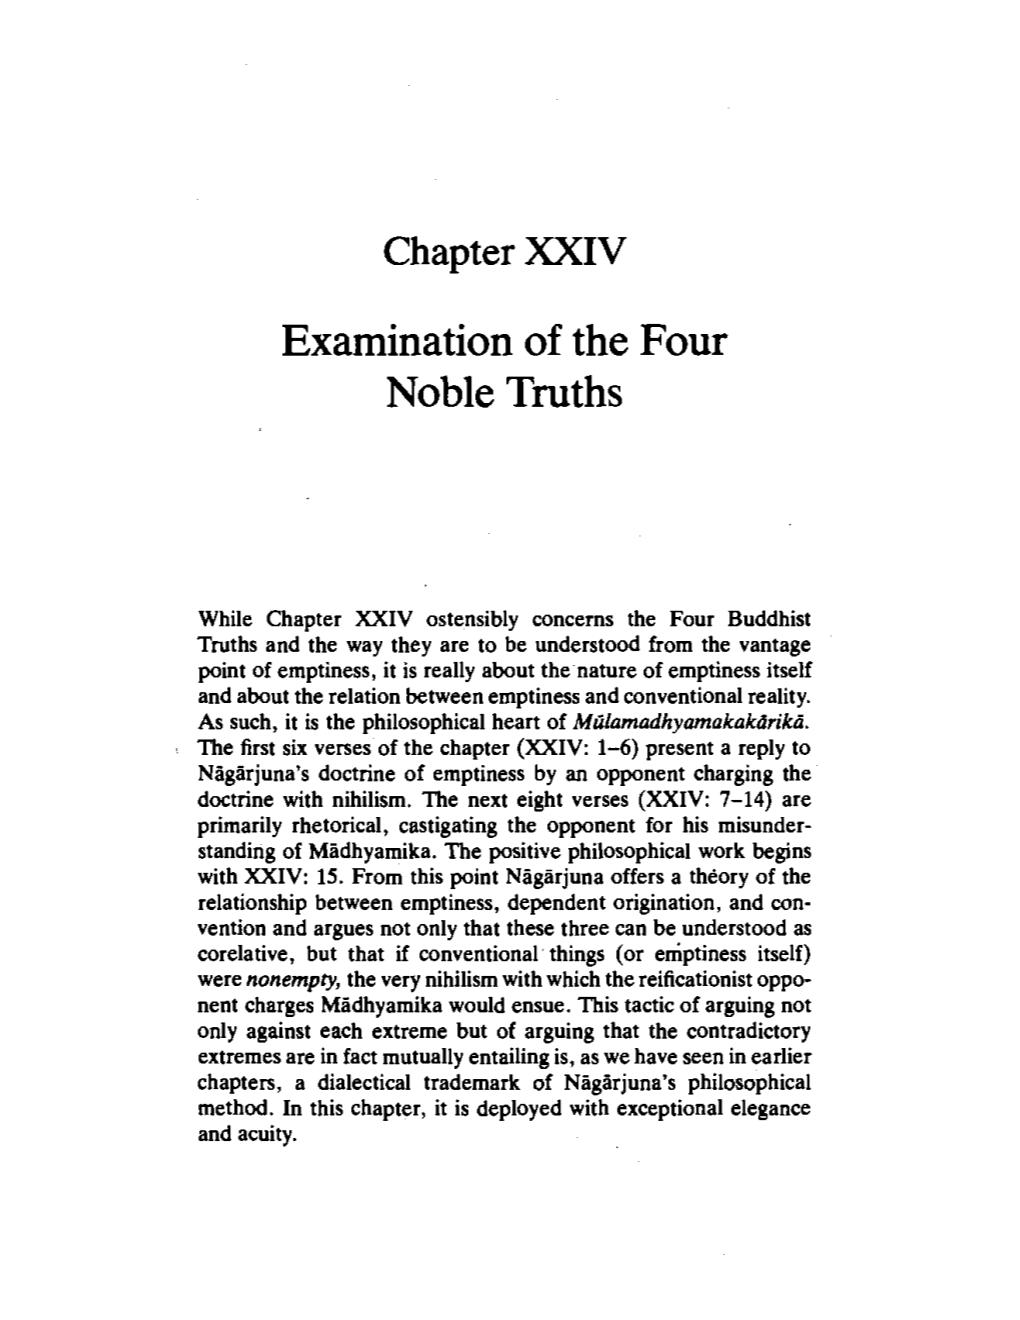 Examination of the Four Noble Truths